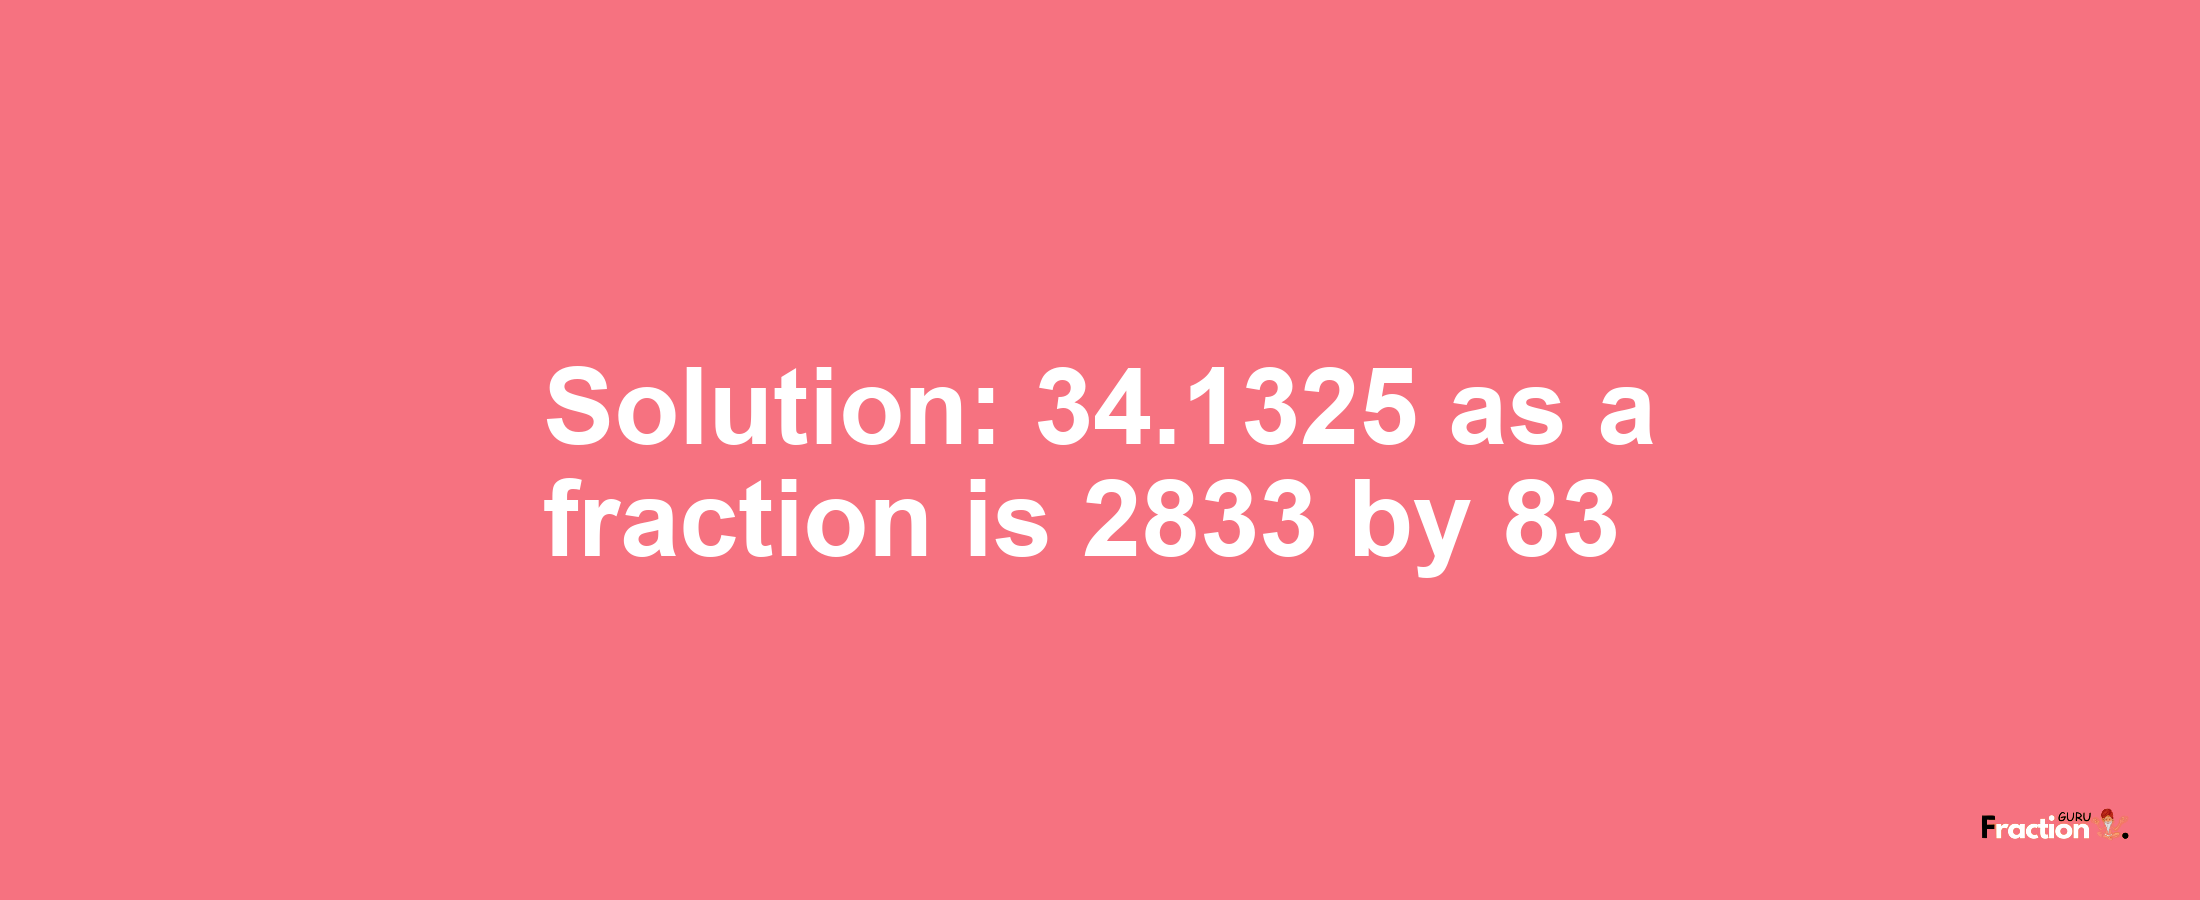 Solution:34.1325 as a fraction is 2833/83